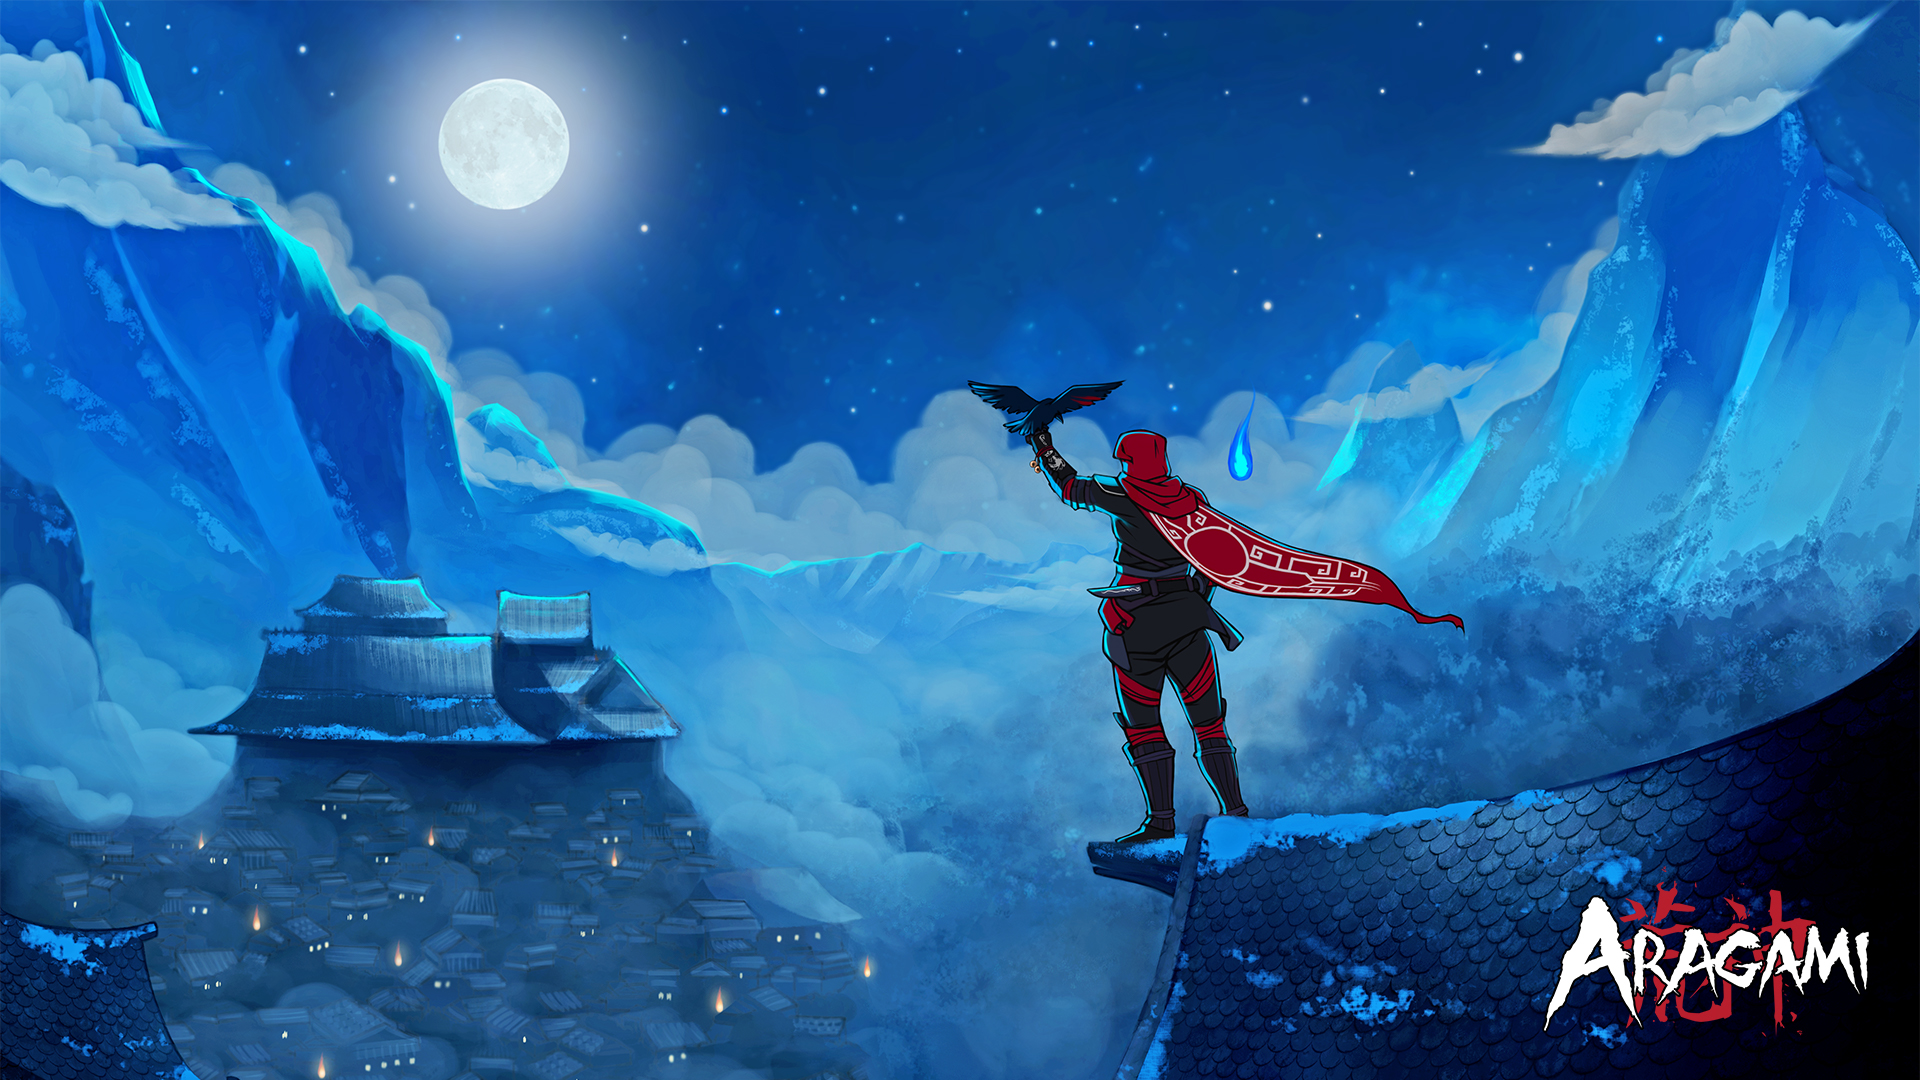 Video Game Aragami HD Wallpaper | Background Image